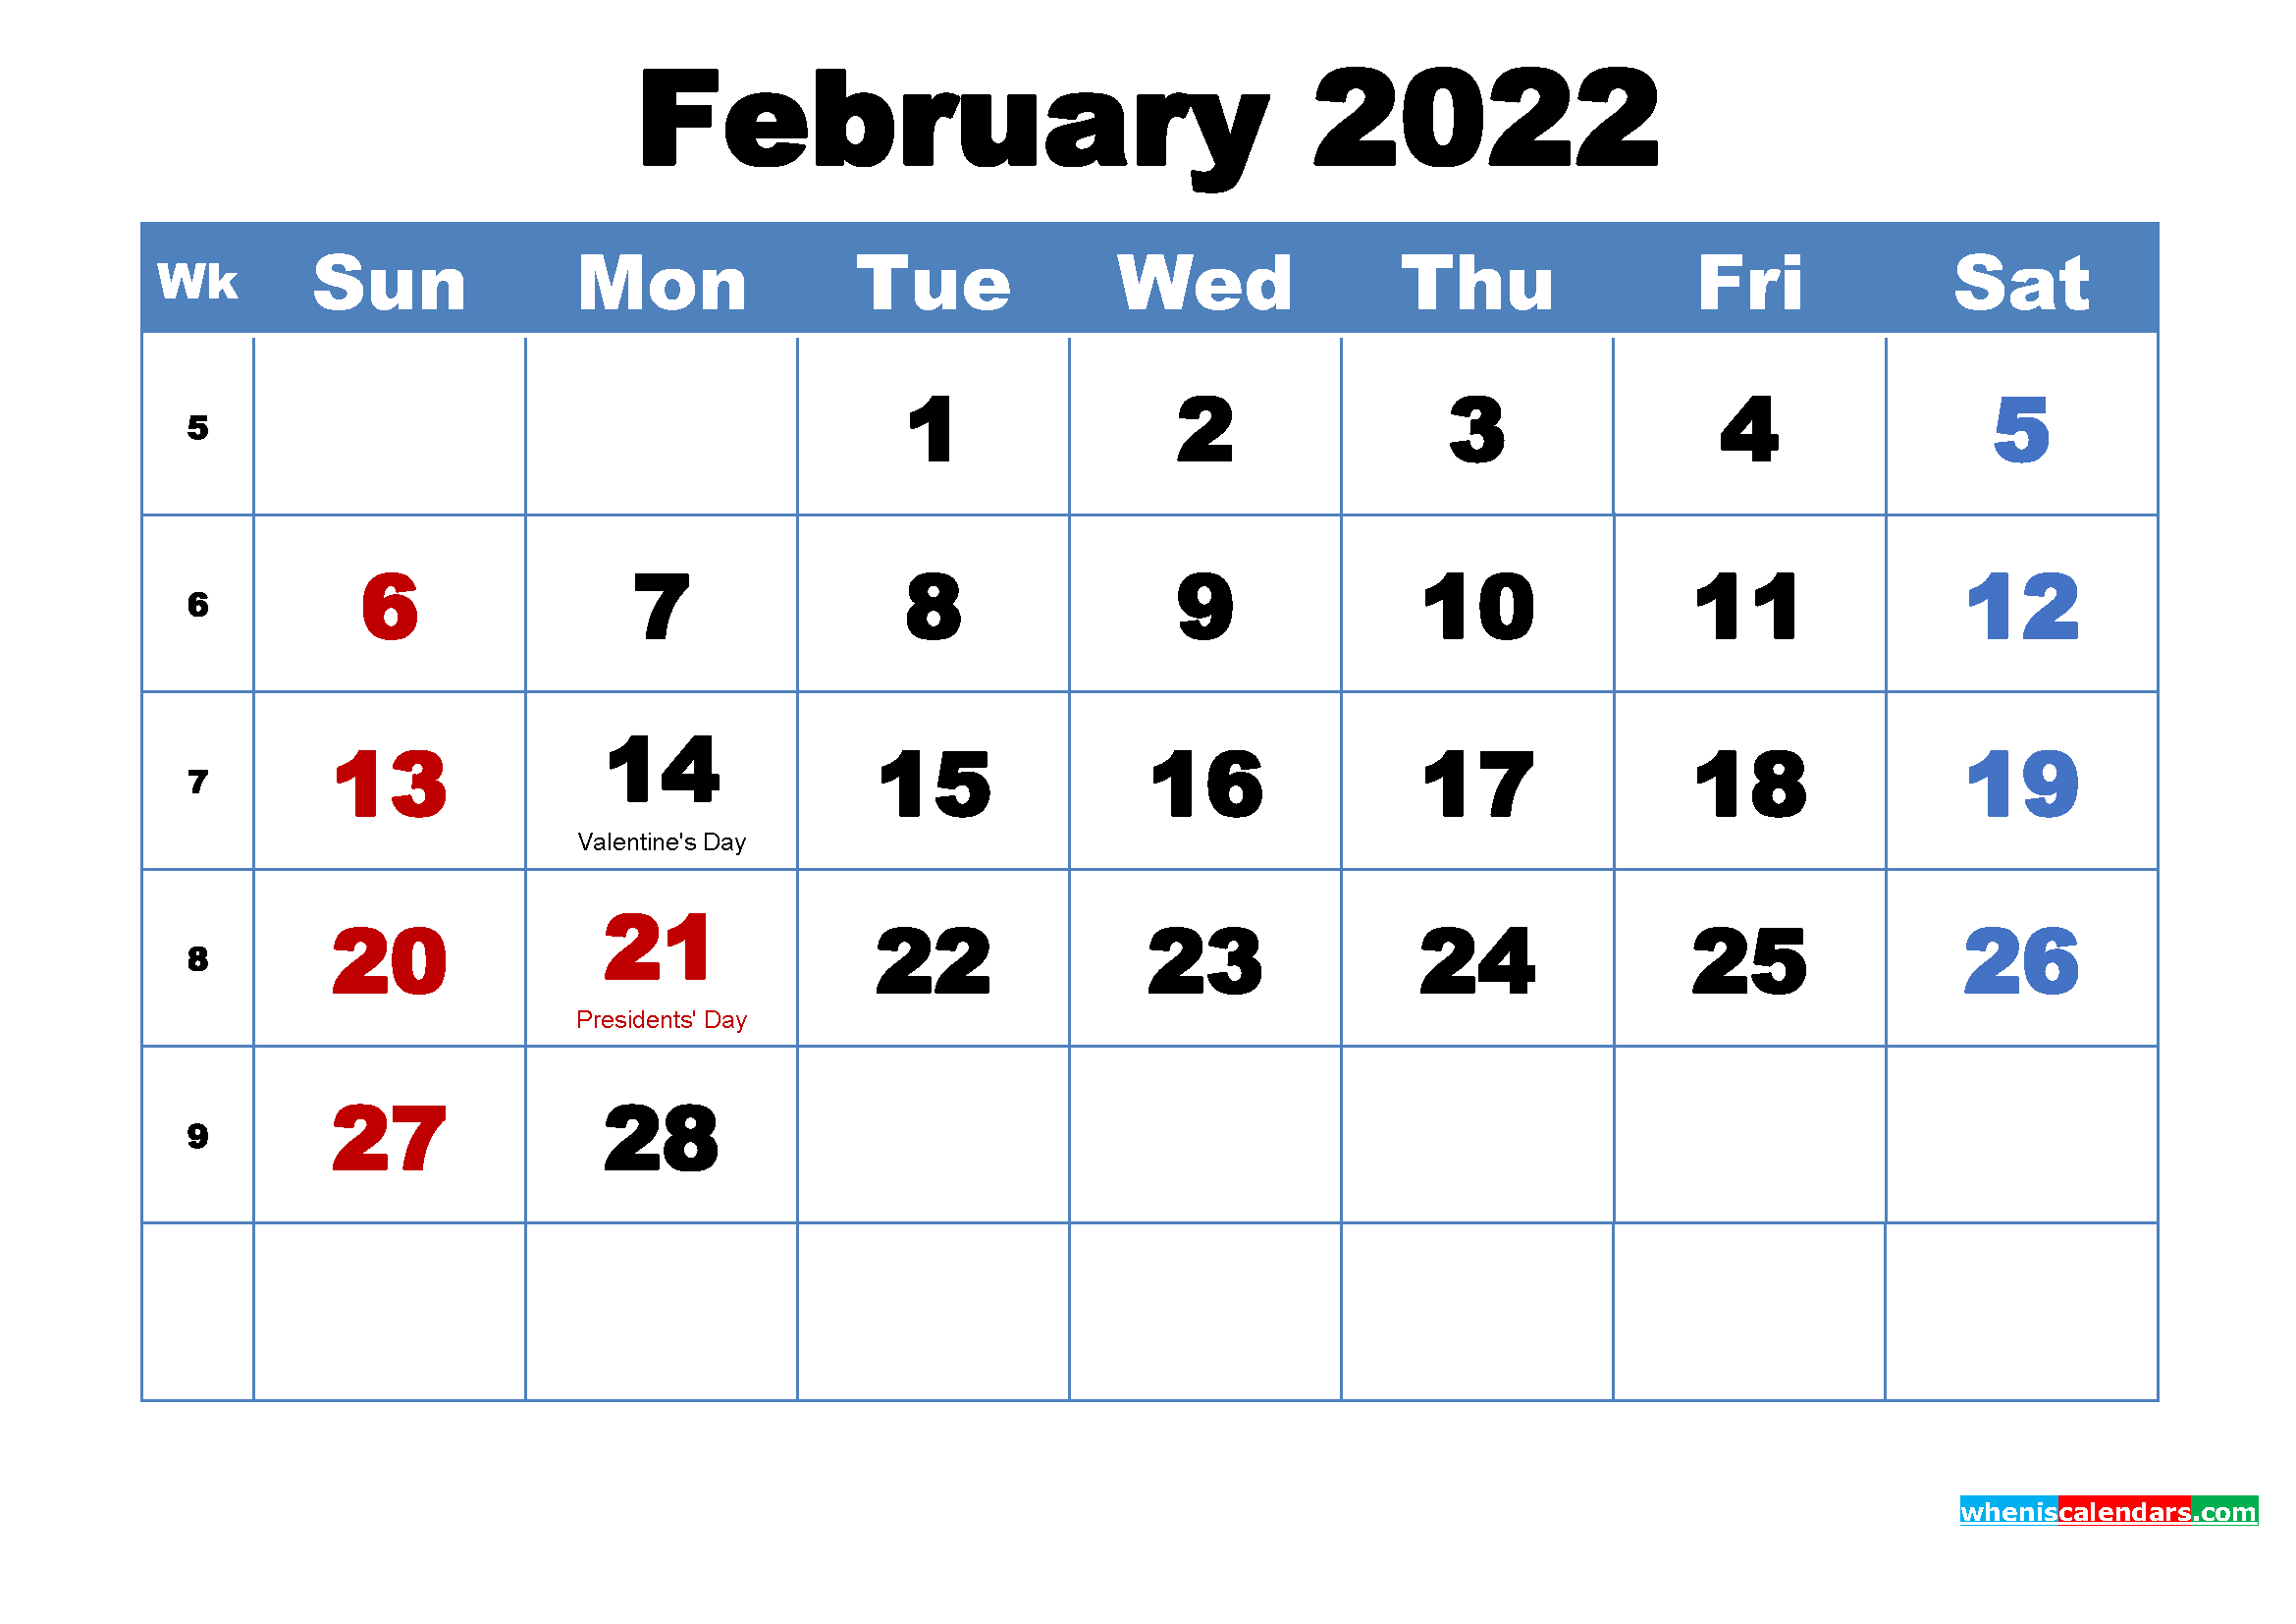 Free Printable February 2022 Calendar with Holidays as PDF and PNG Image